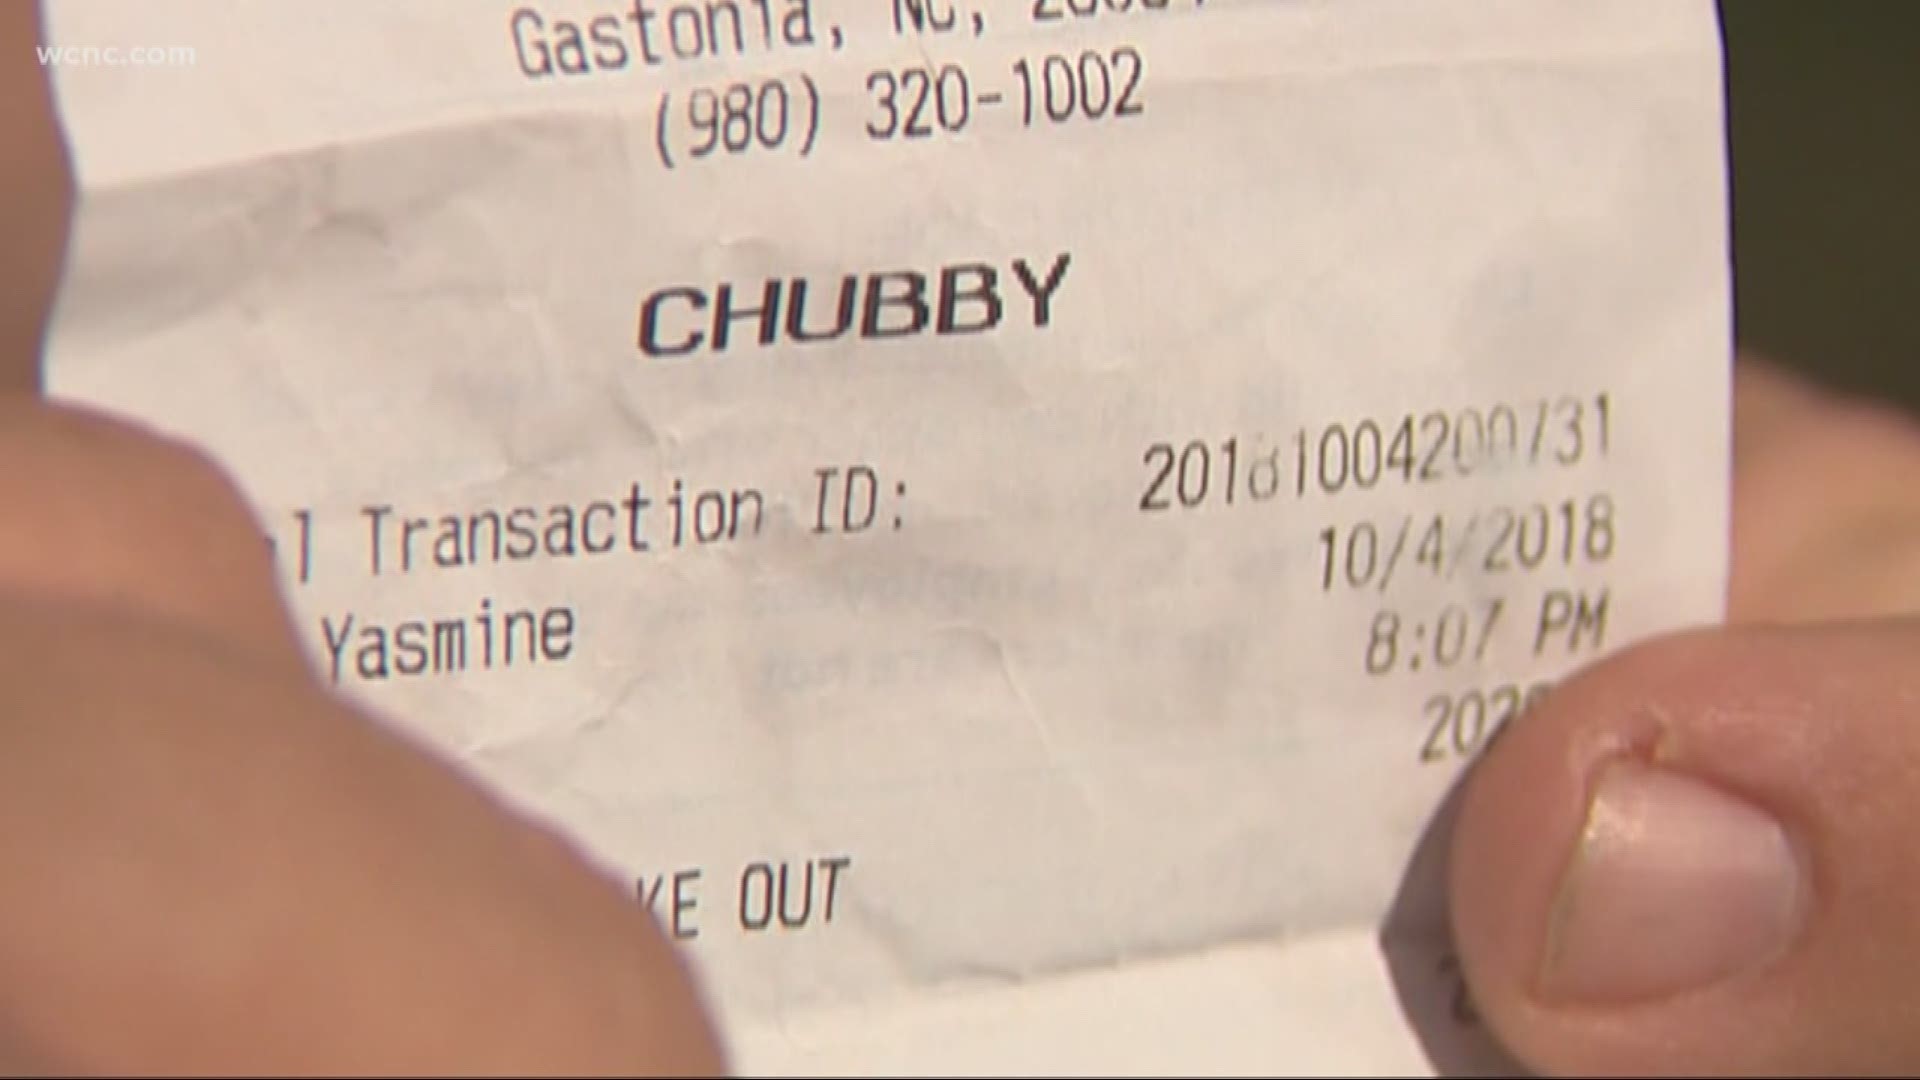 Jimmy Shue said he was upset but was ready to let it go. That?s when another employee came to the counter with his order and called out the name on the ticket.